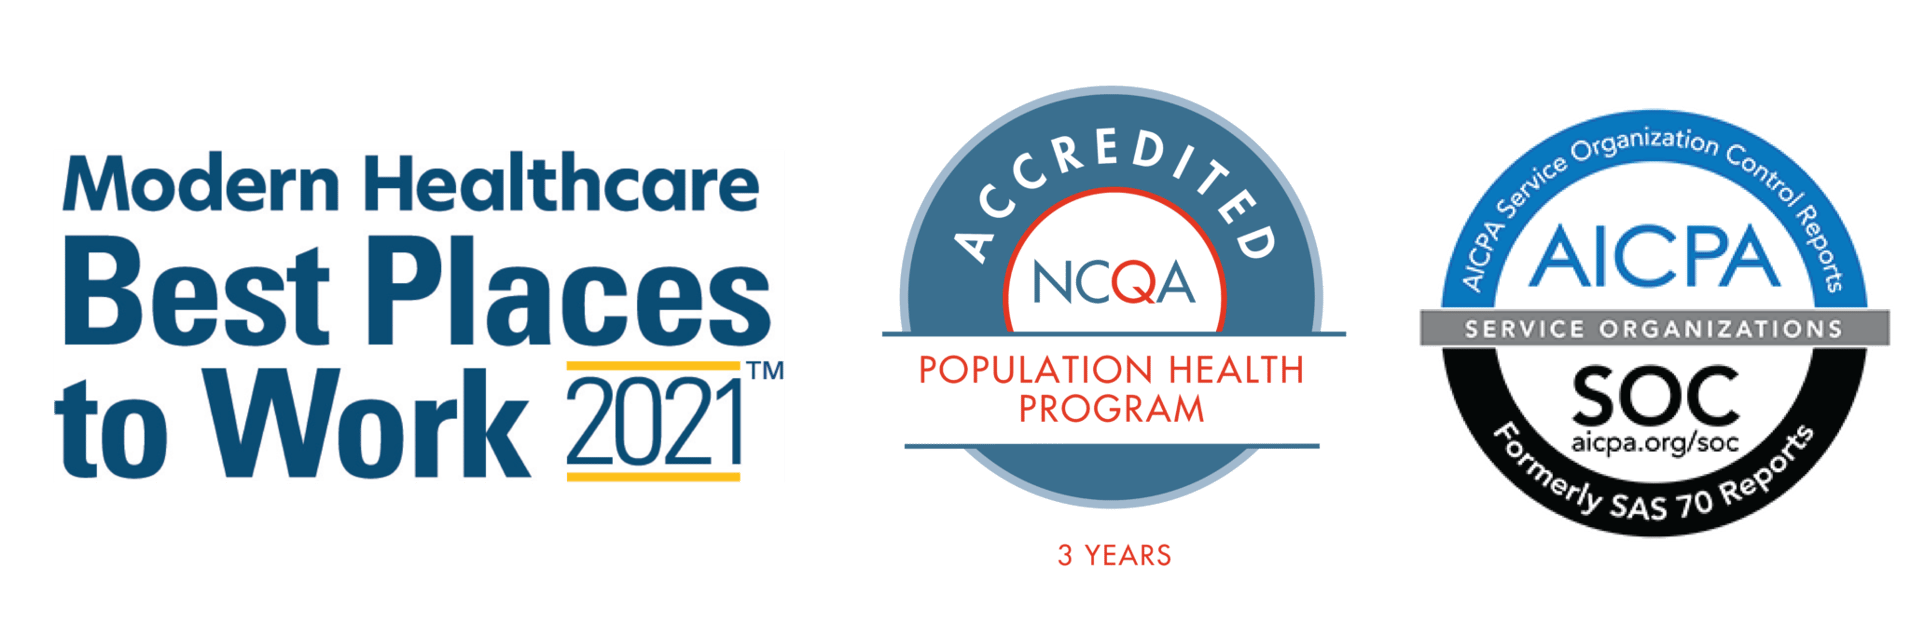 Modern Healthcare Best Places to Work, NCQA Accreditation, AICPA